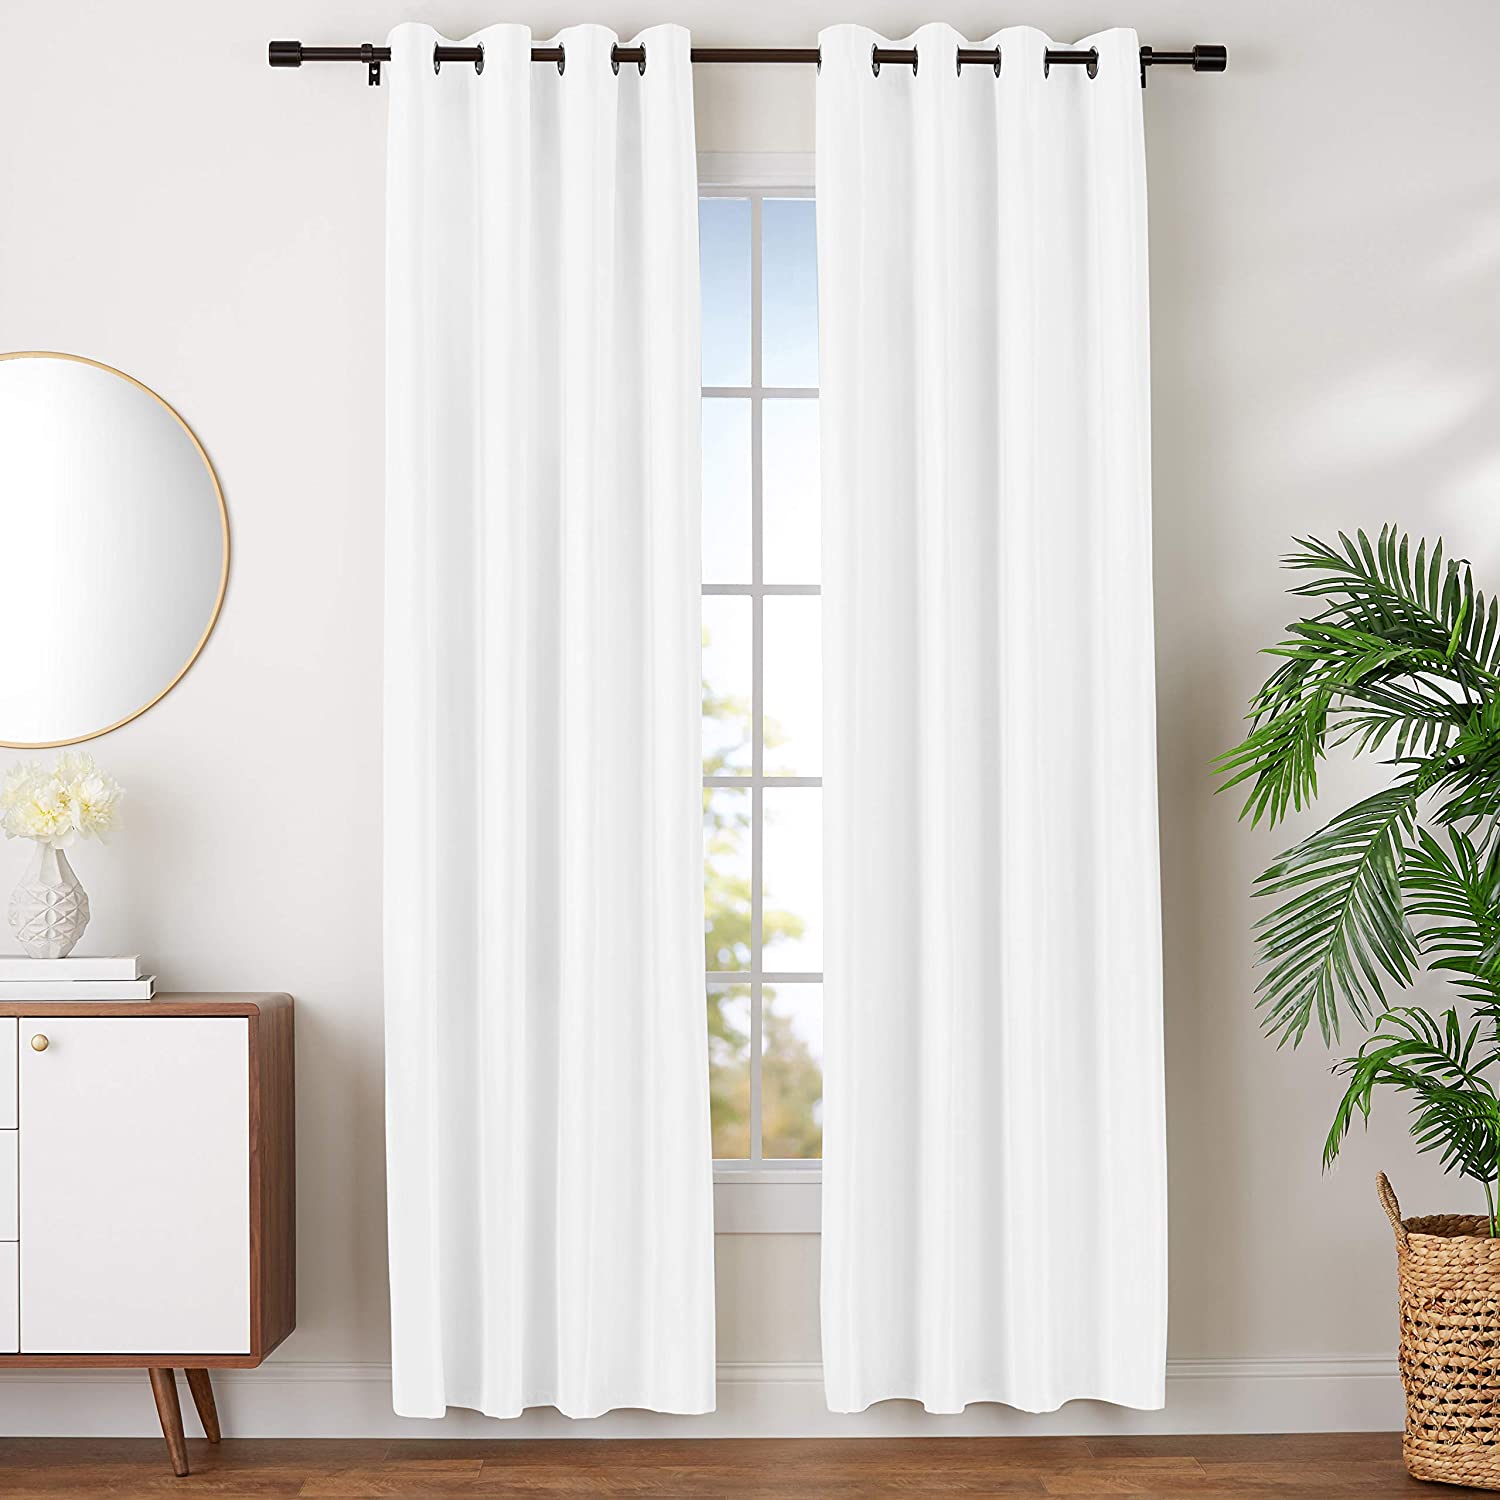 Neutral Vertical Blinds For Your Living Space